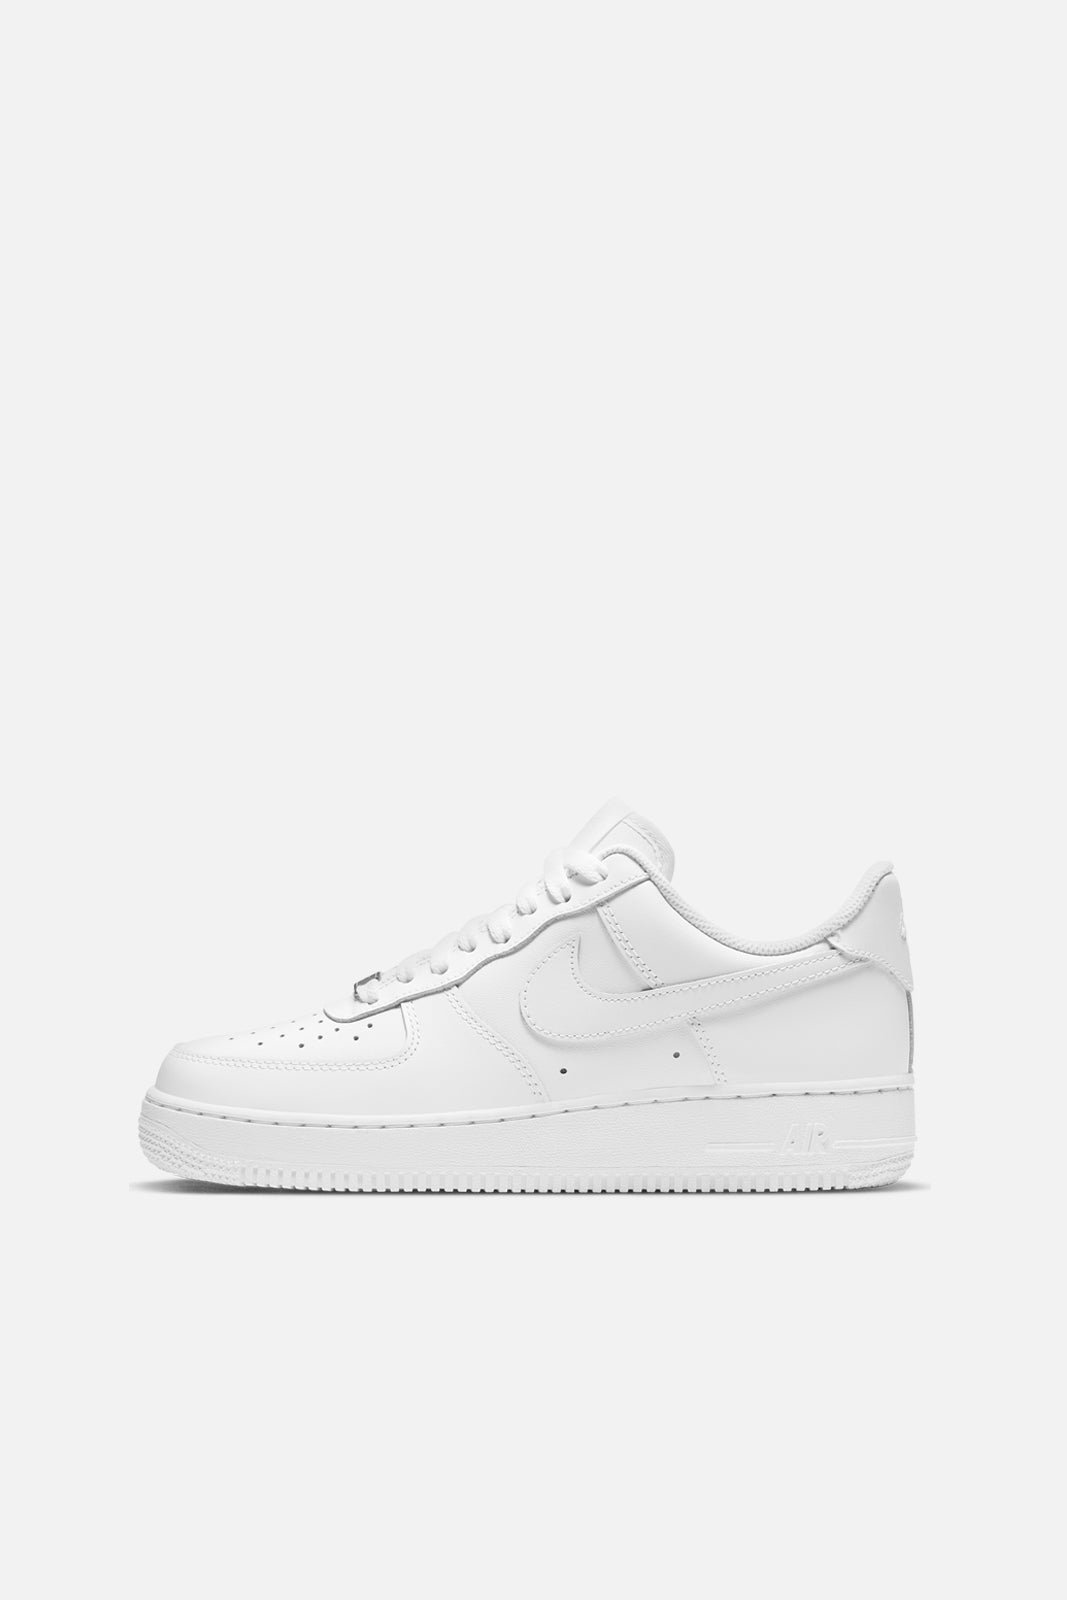 New Nike Air Force 1 Mid 07 LV8 White Black (Size 10) Ready To Ship!